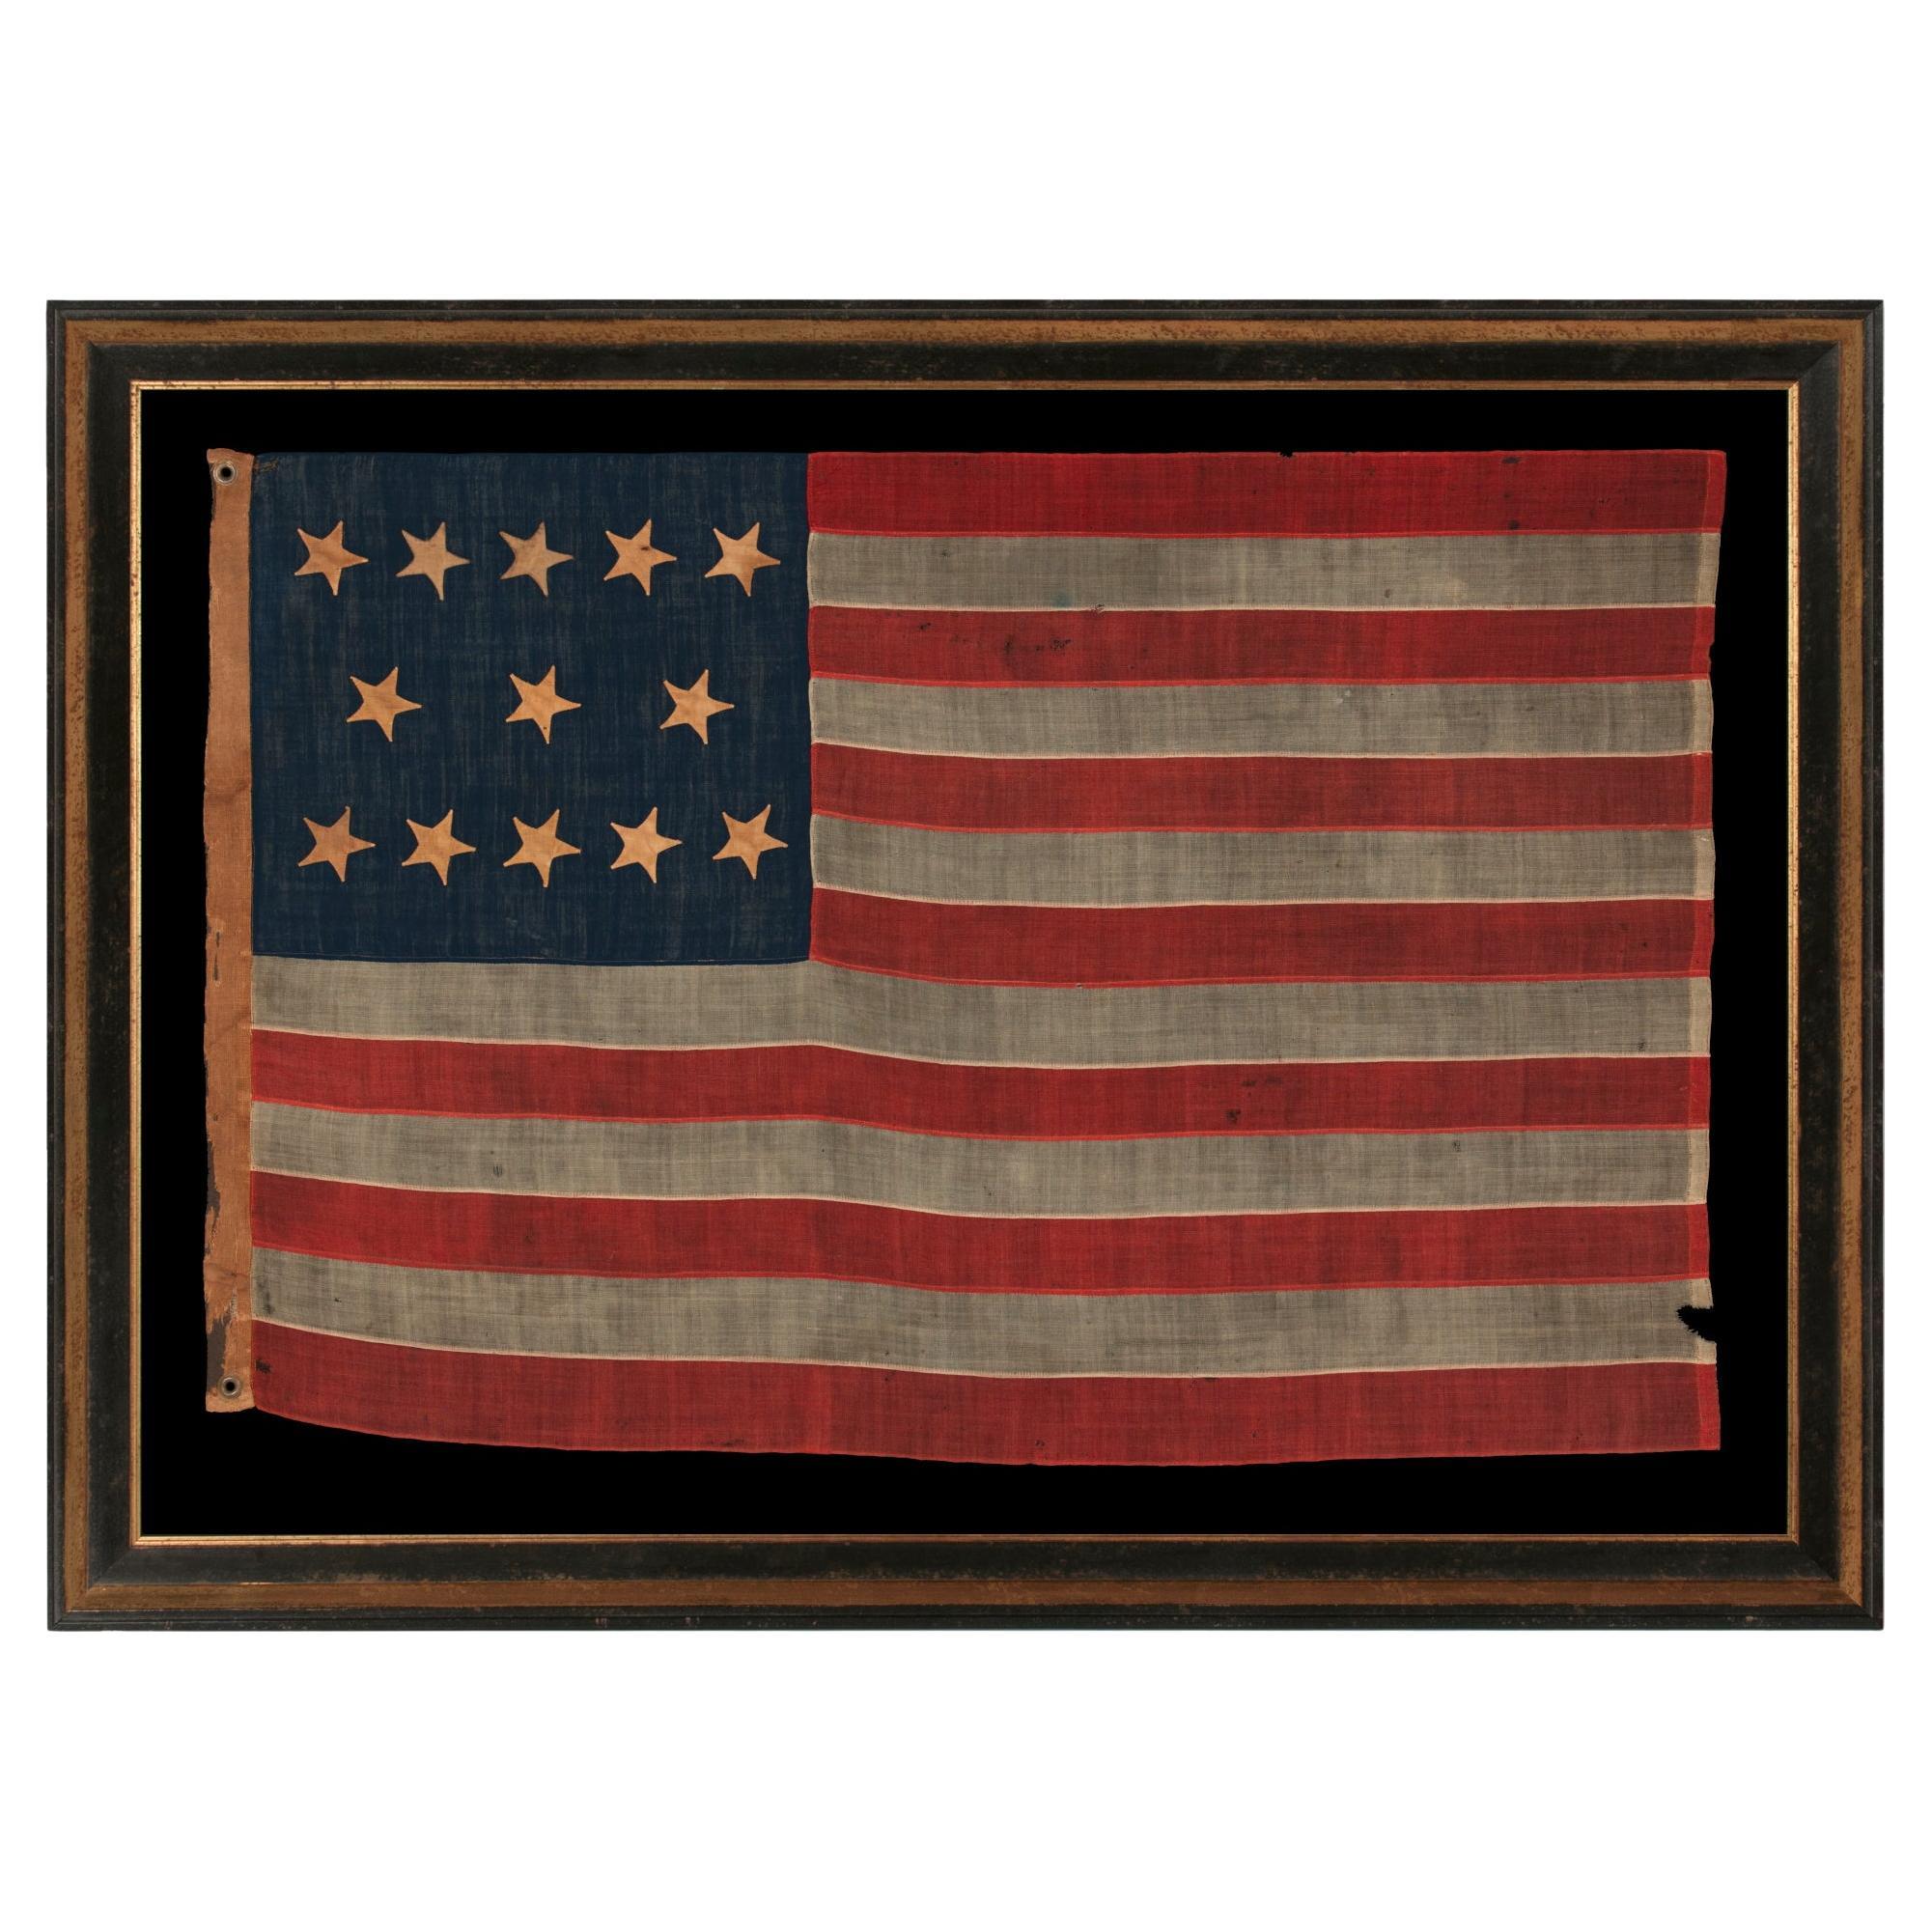 13 Star Antique American Flag with Hand-Sewn Stars in 5-3-5 Pattern, ca 1861-65